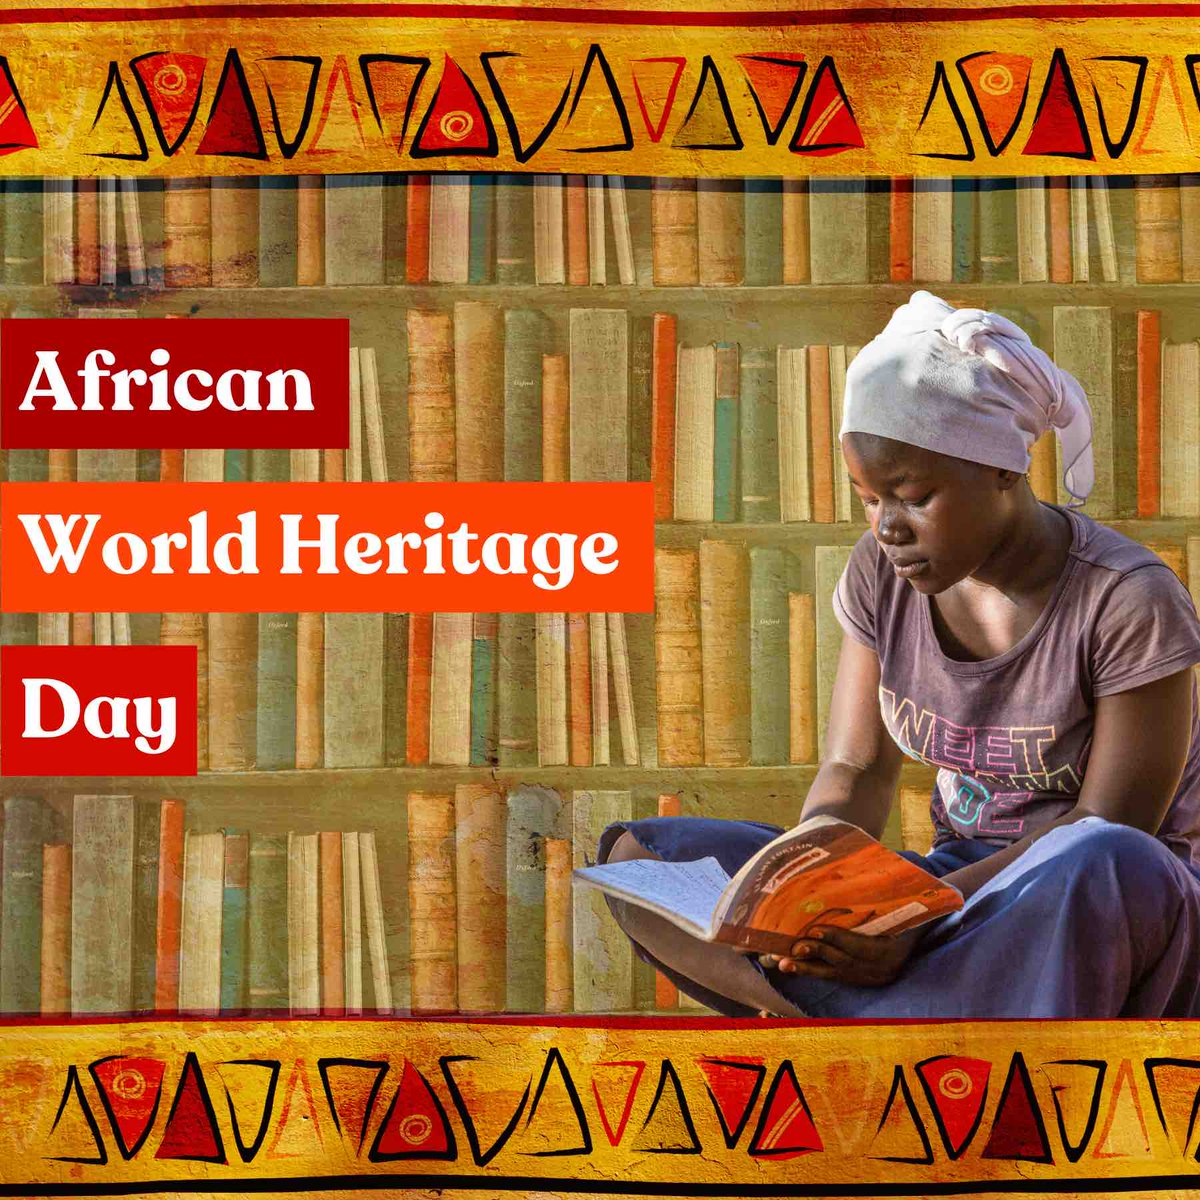 #Education is the key to keeping Africa’s abundant cultural and natural treasures intact. #AfricanWorldHeritage